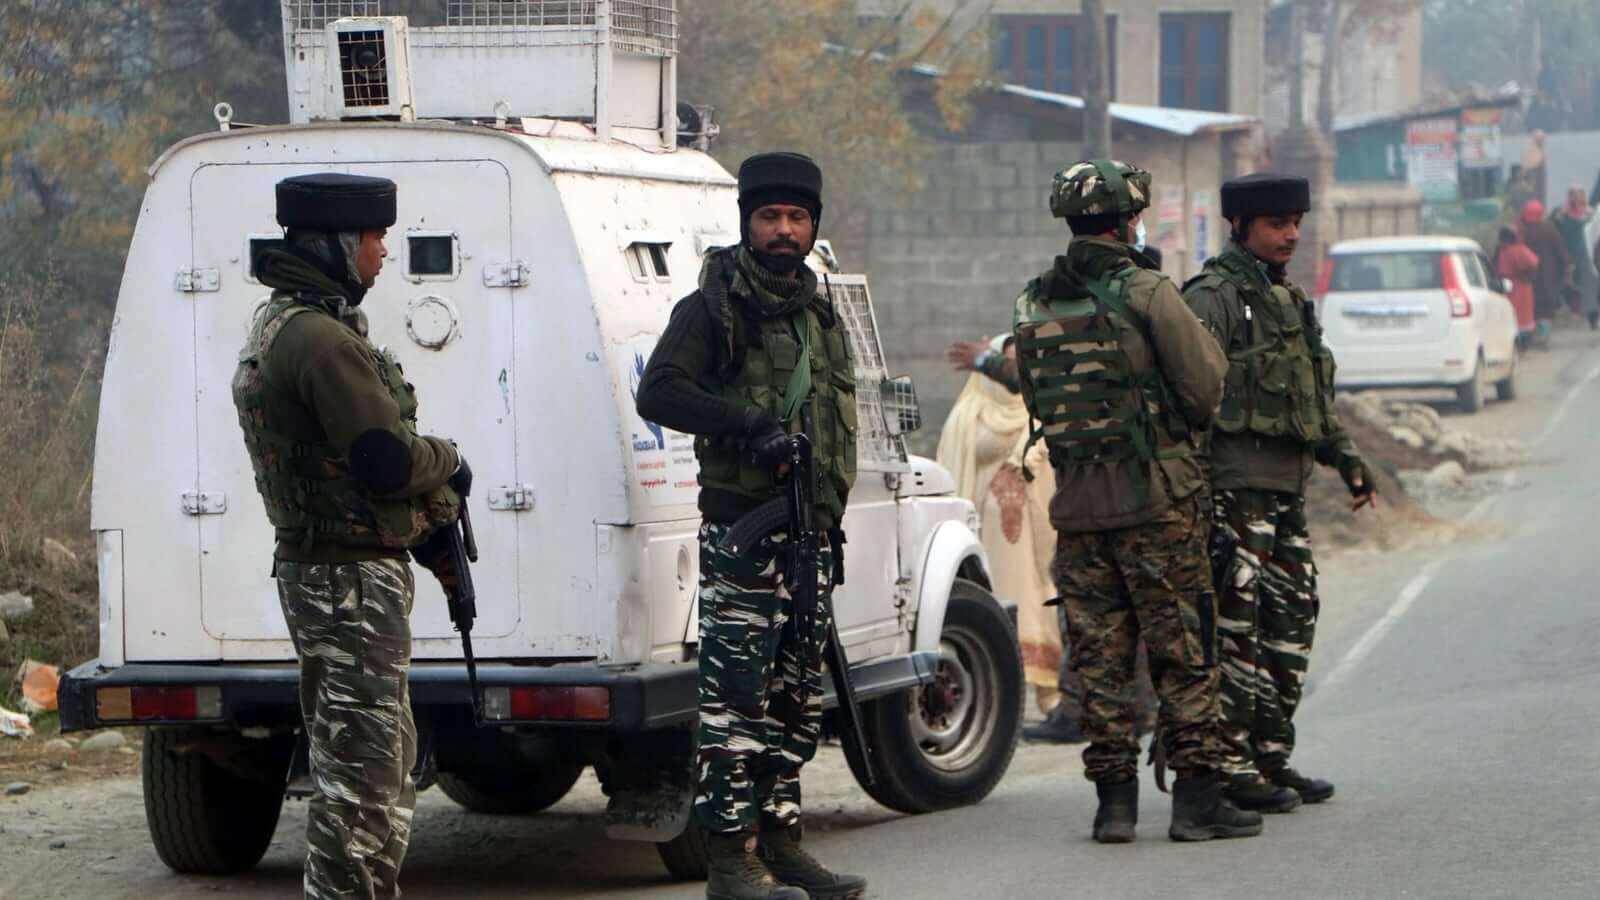 Pakistan Condemns Indian Forces’ Killing of Five Alleged Militants in Kashmir